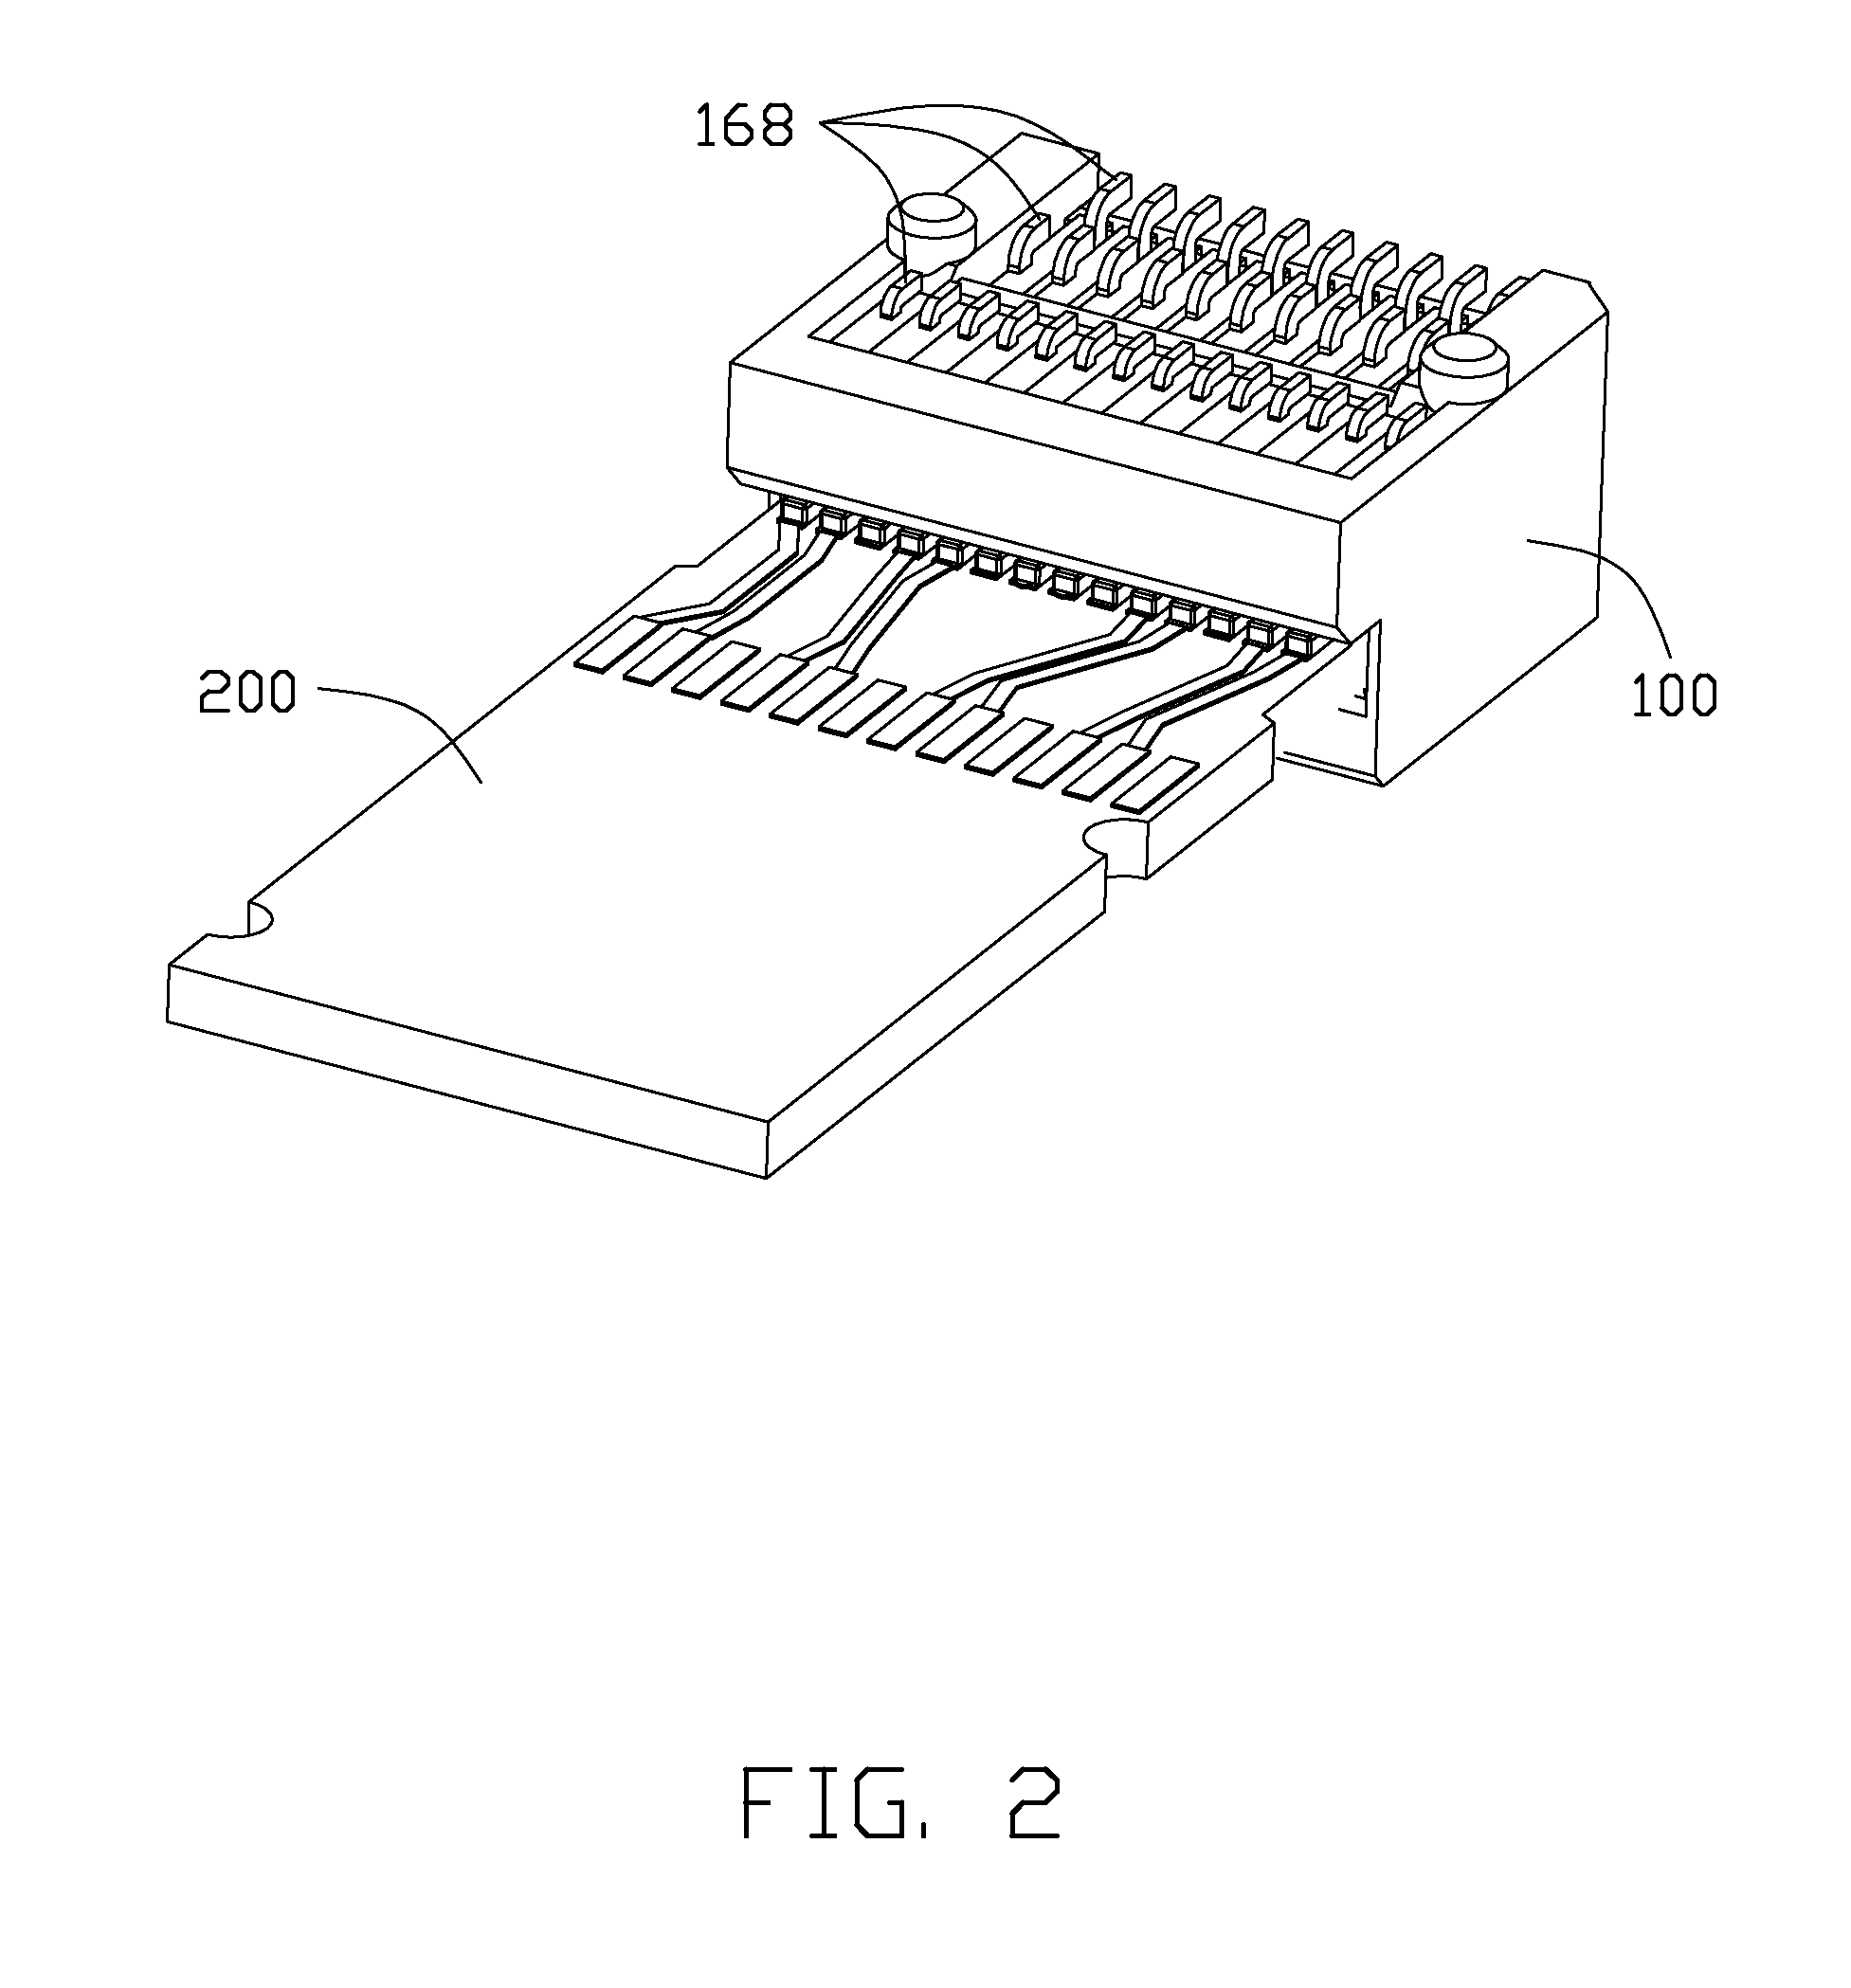 Connector assembly having front and rear rows of terminals with differently leveled contacting portions